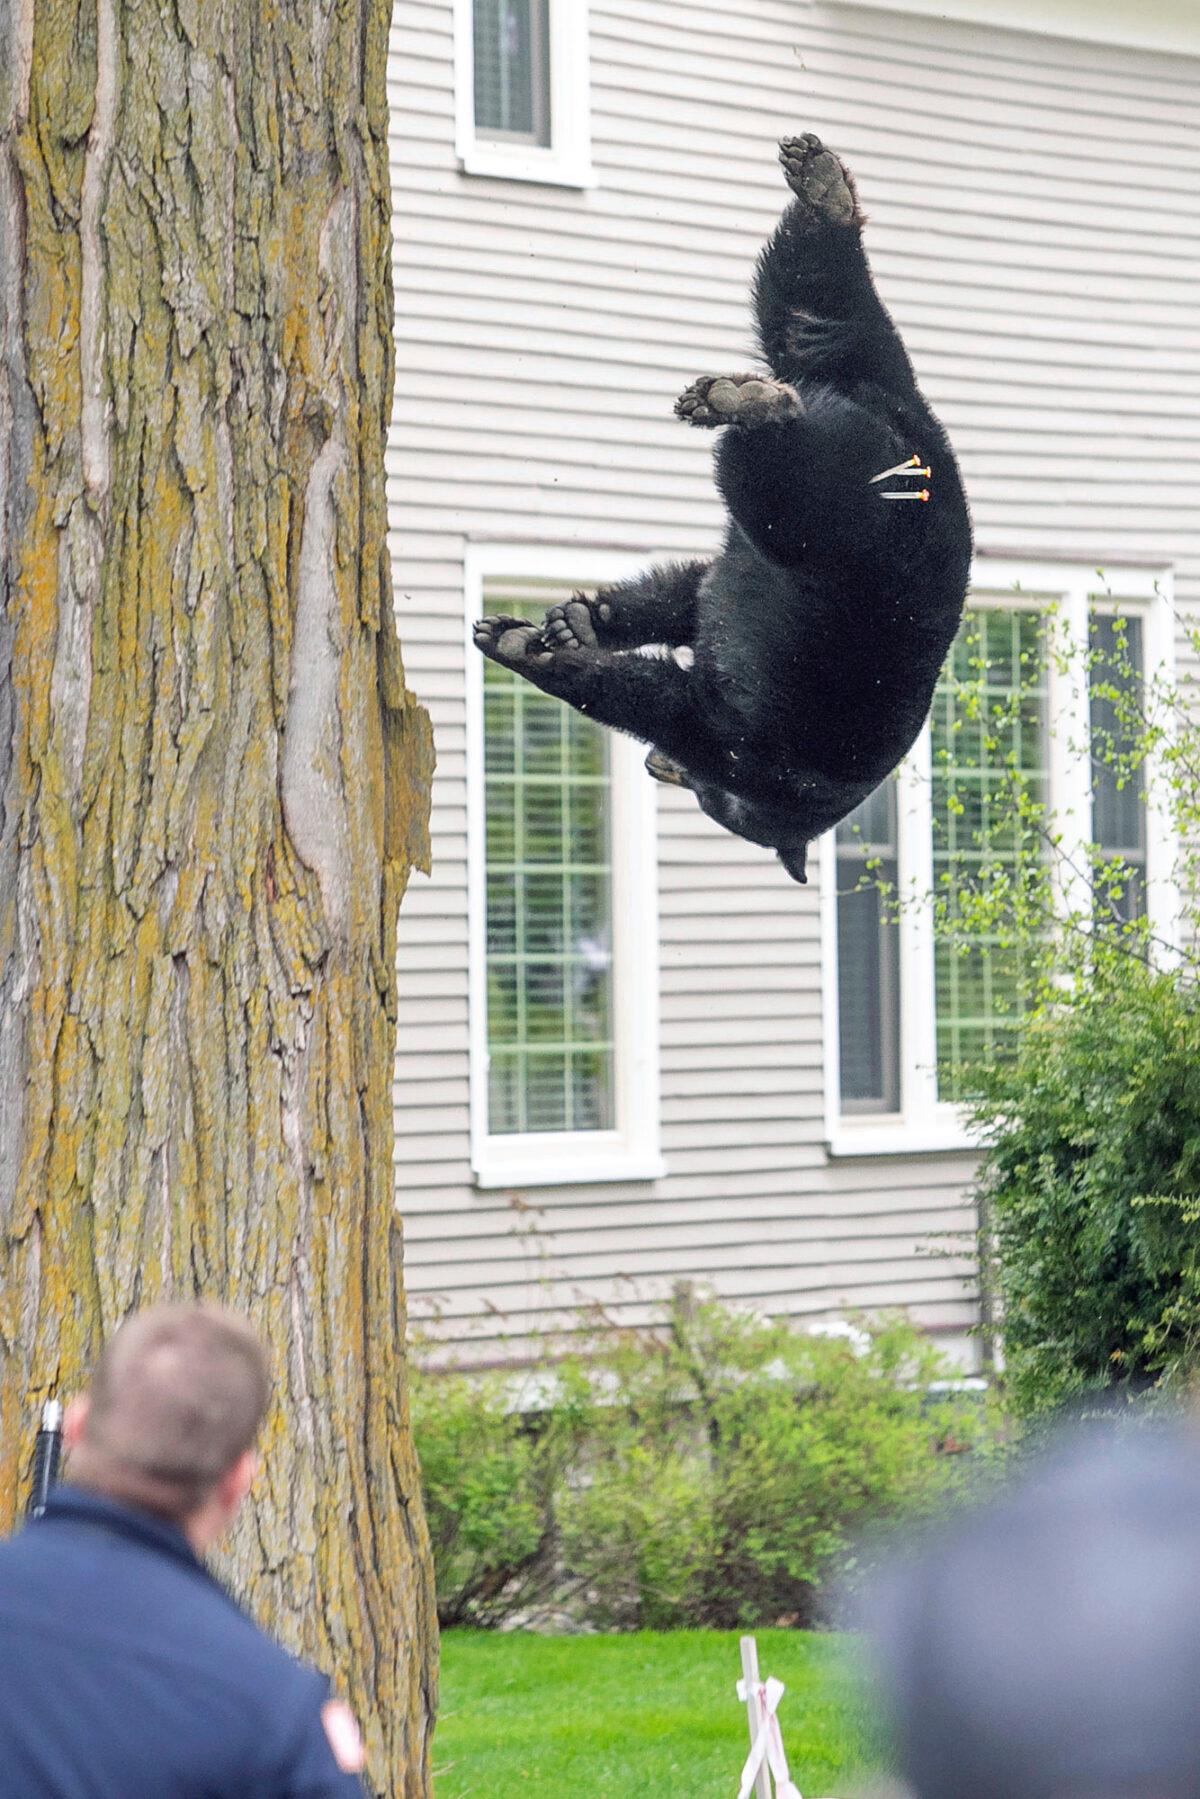 A tranquilized black bear falls from a tree outside of a home in Traverse City, Mich., on May 14, 2023. (Jan-Michael Stump/Traverse City Record-Eagle via AP)